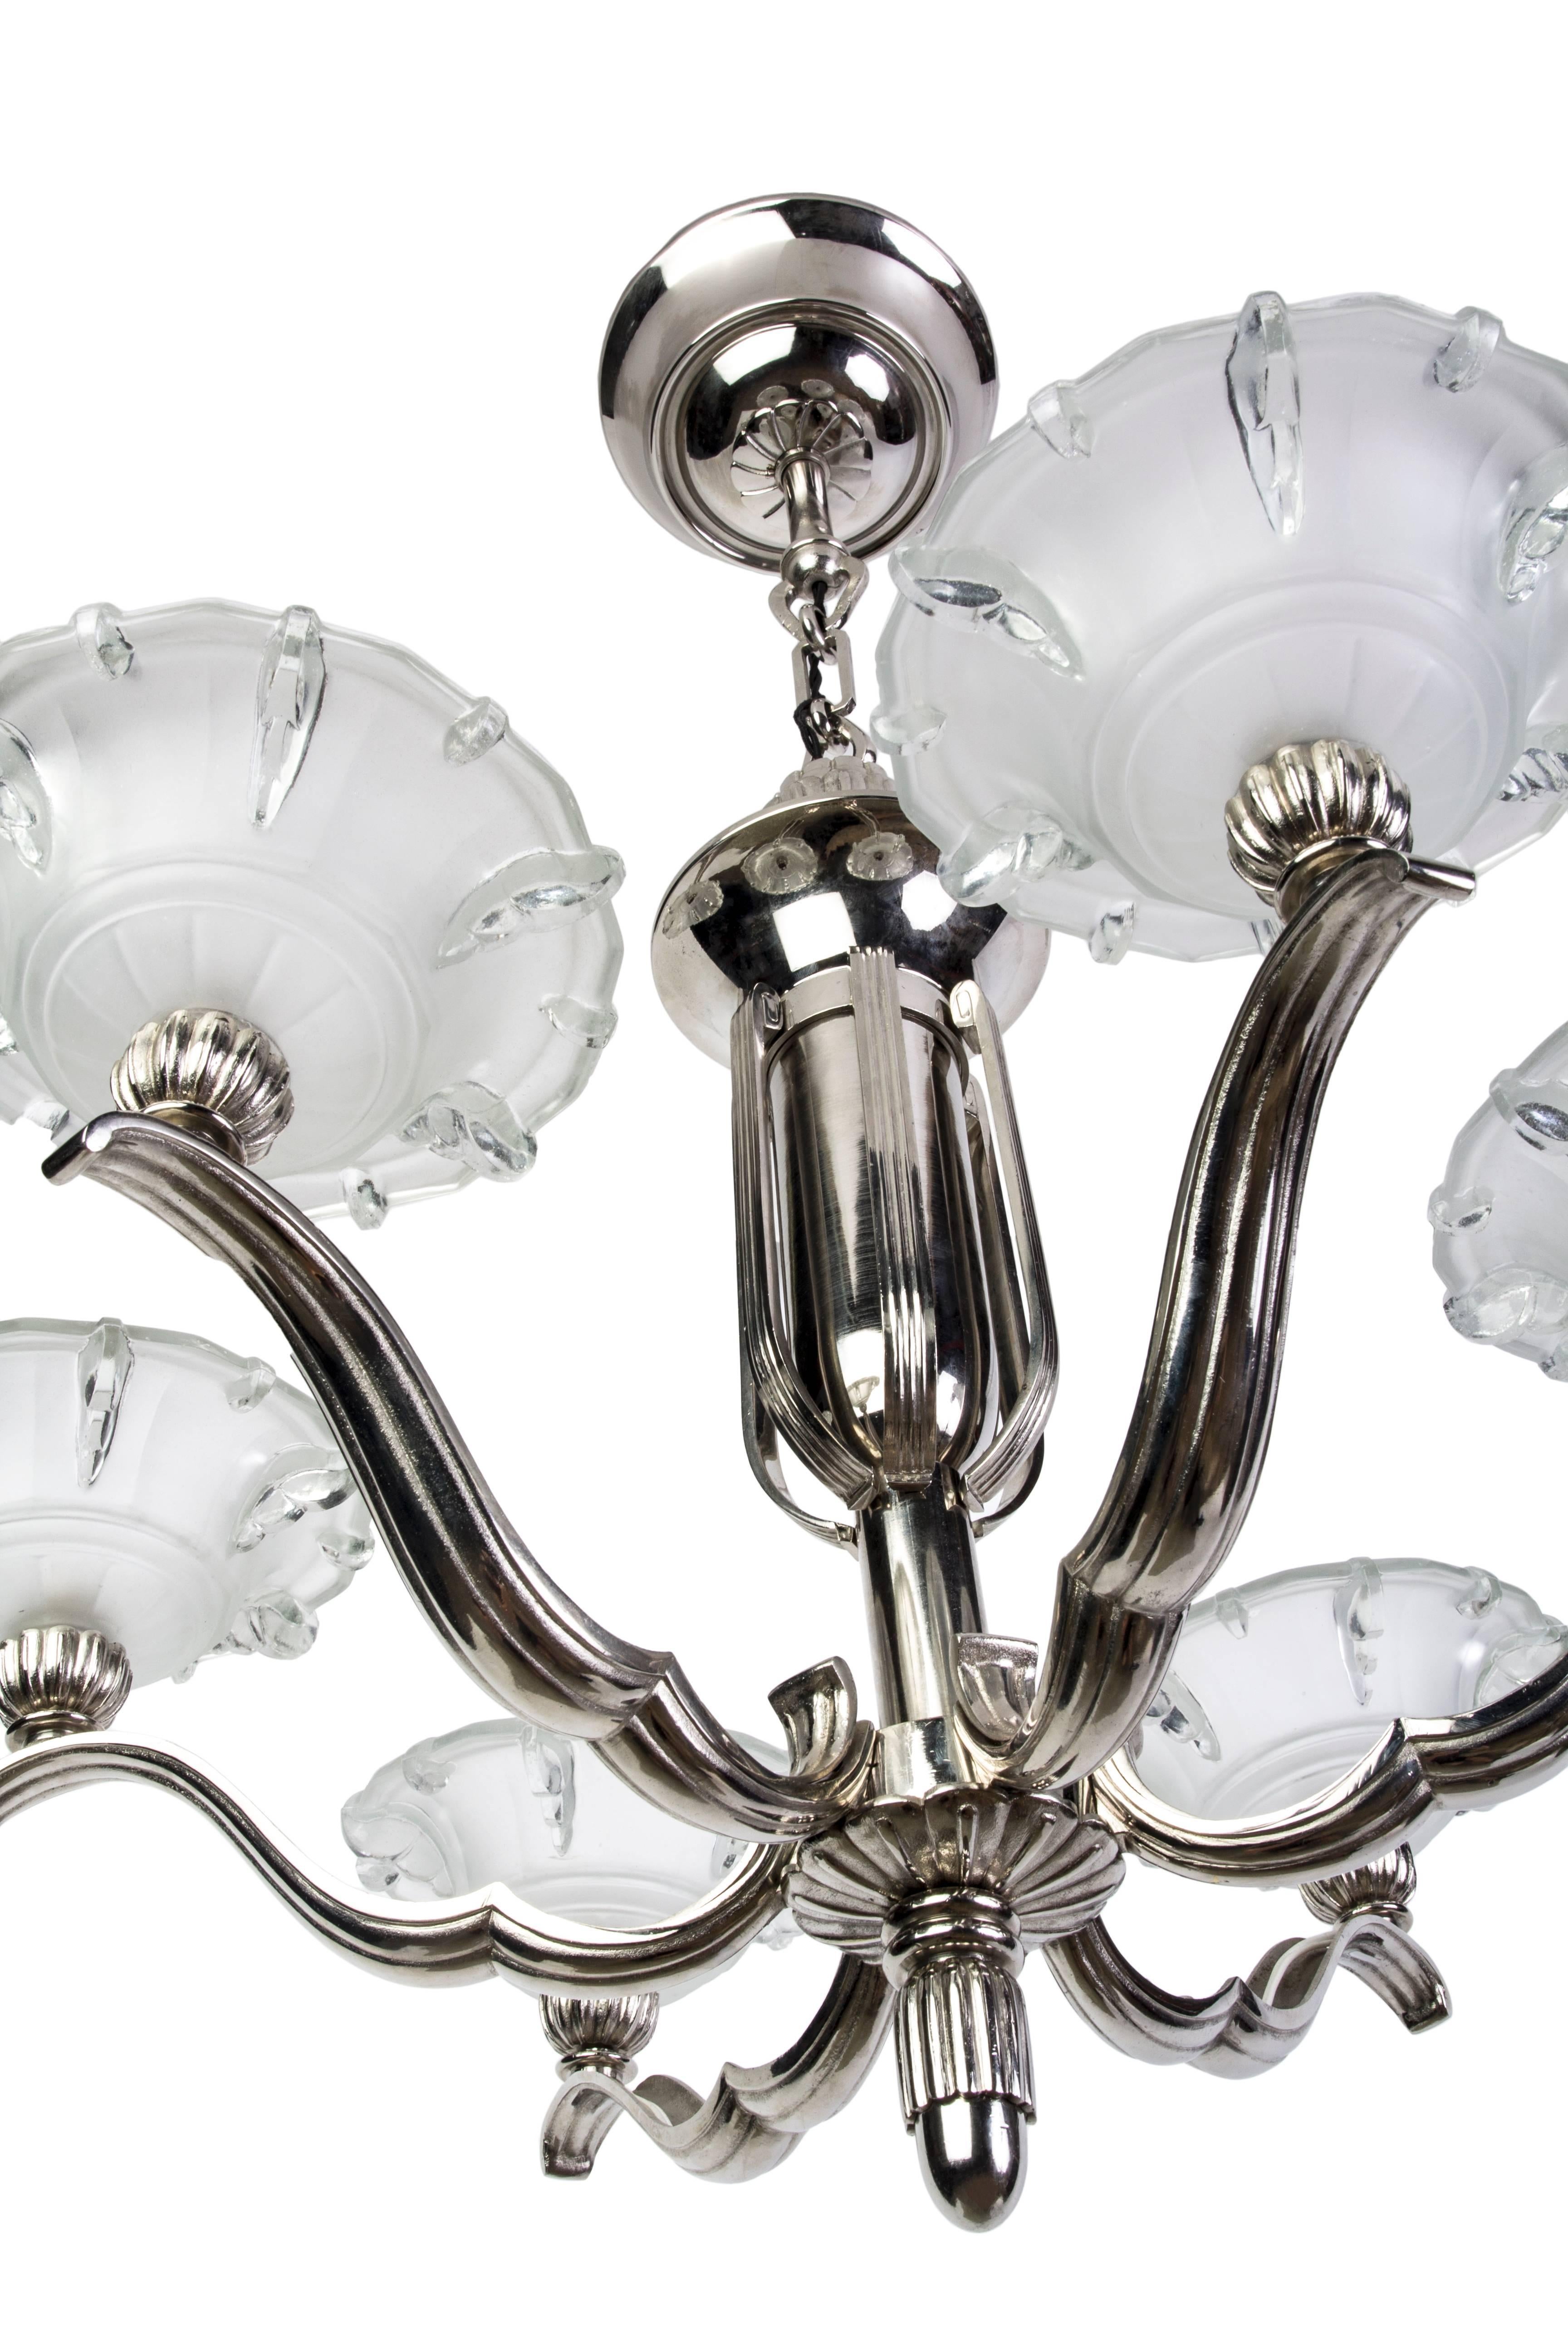 This exceptional Art Deco chandelier was designed by Petitot. It features a nickel-plated frame with six stylized floral frosted glass shades. It is in excellent condition and has been newly rewired.